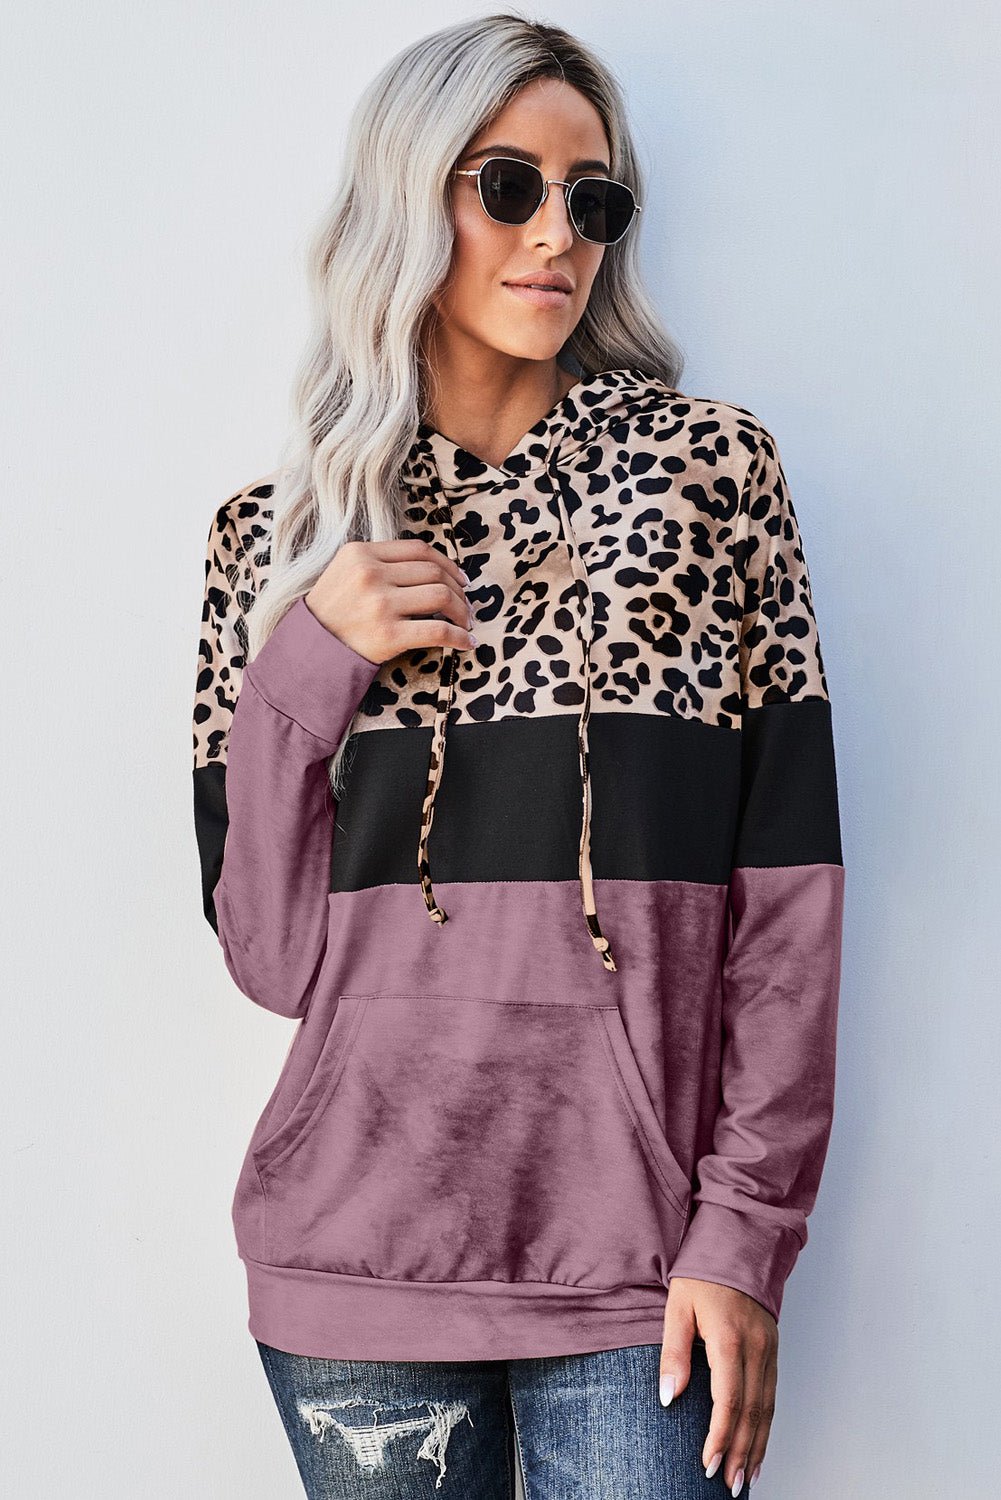 Leopard Color Block Hoodie - purple color block hoodie with leopard print and kangaroo pockets #Firefly Lane Boutique1